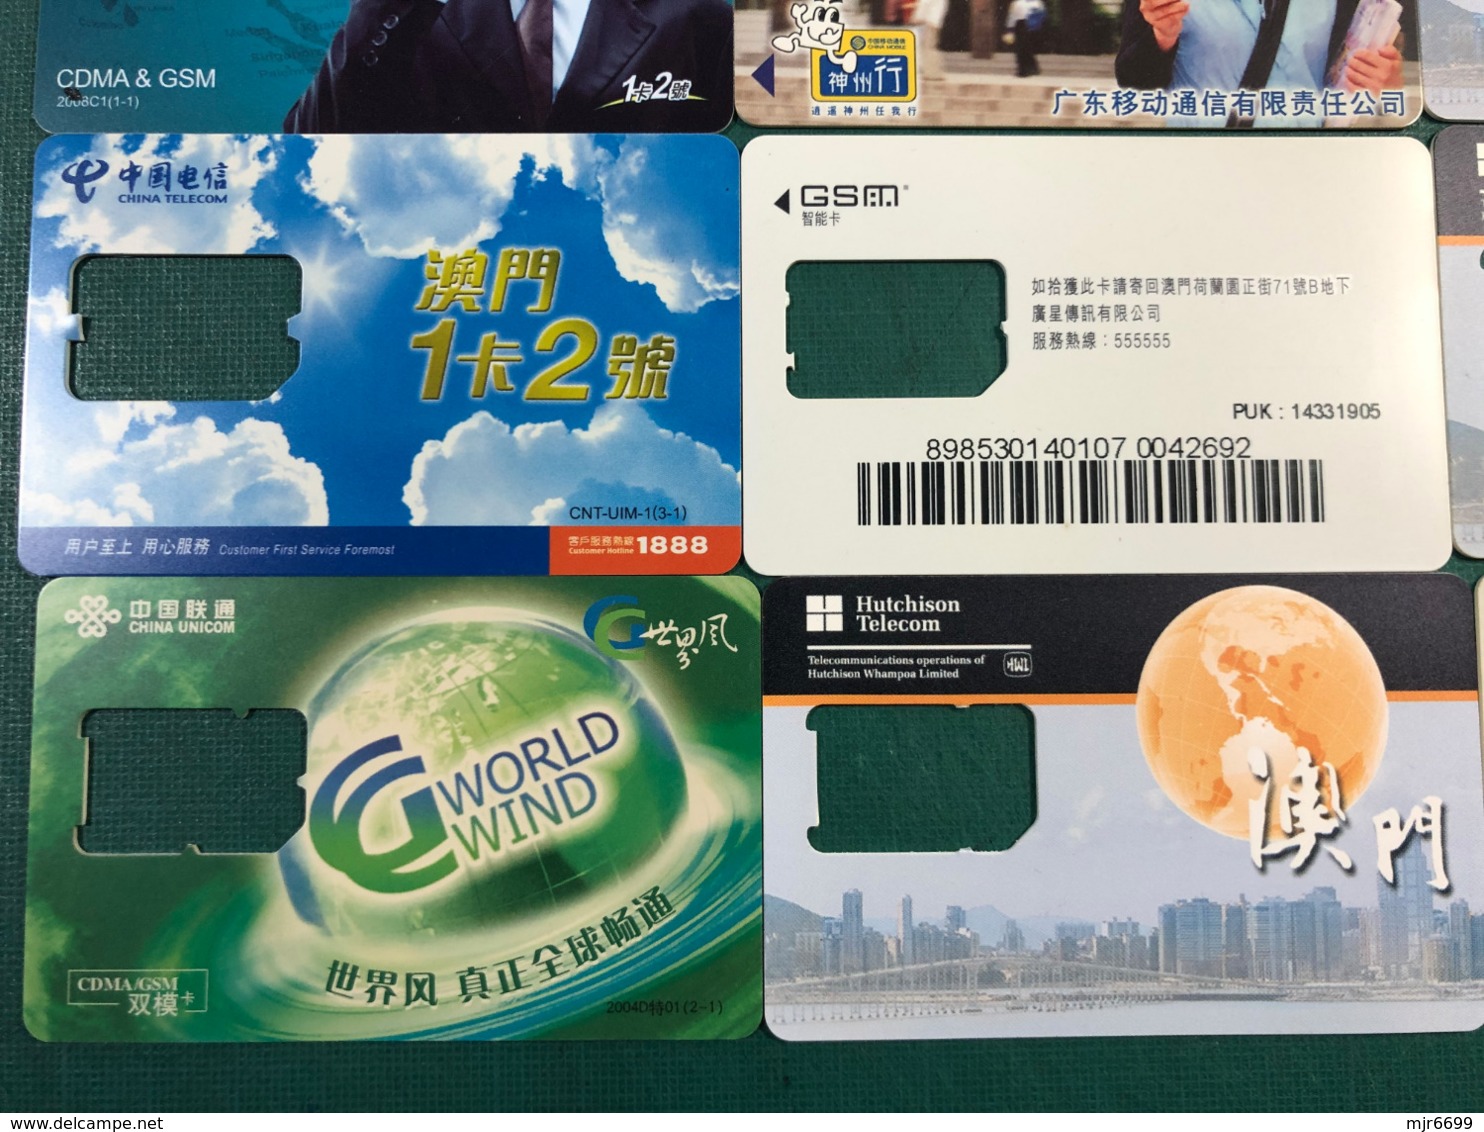 MACAU, CHINA & THAILAND LOT OF 9 GSM SIM CARD HOLDER, ALL WITH SIM CARD REMOVED - Macao